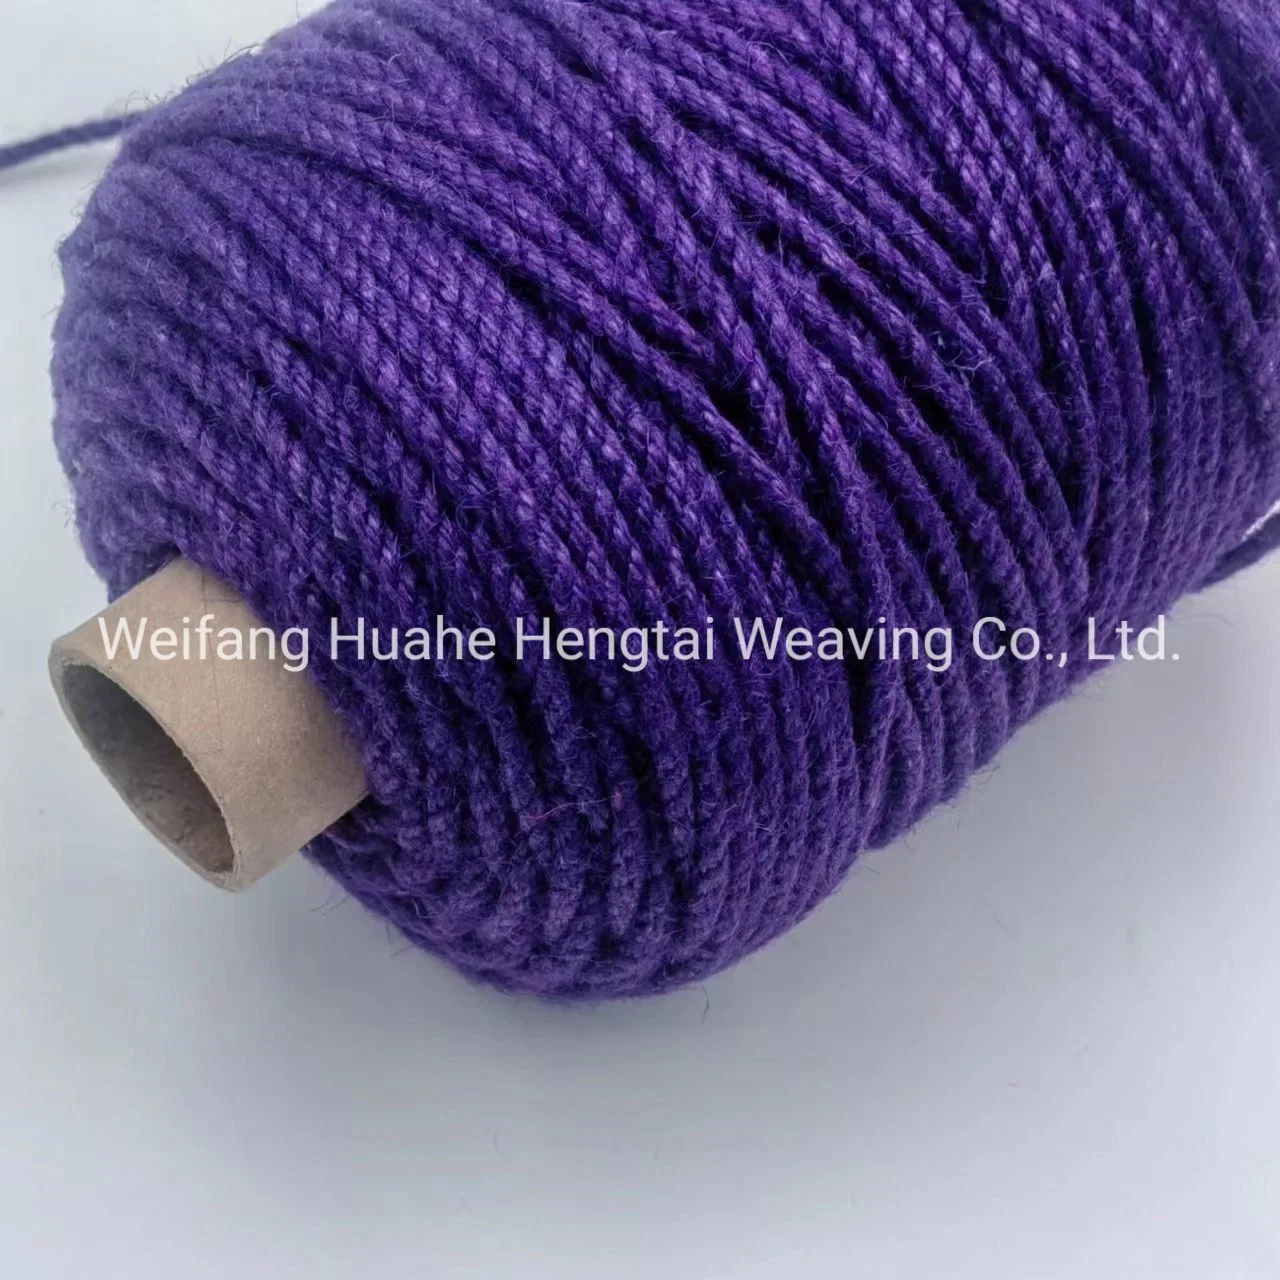 Wholesale/Supplier of Jute Material Colorful Hemp Rope Pendants and Hair Accessories